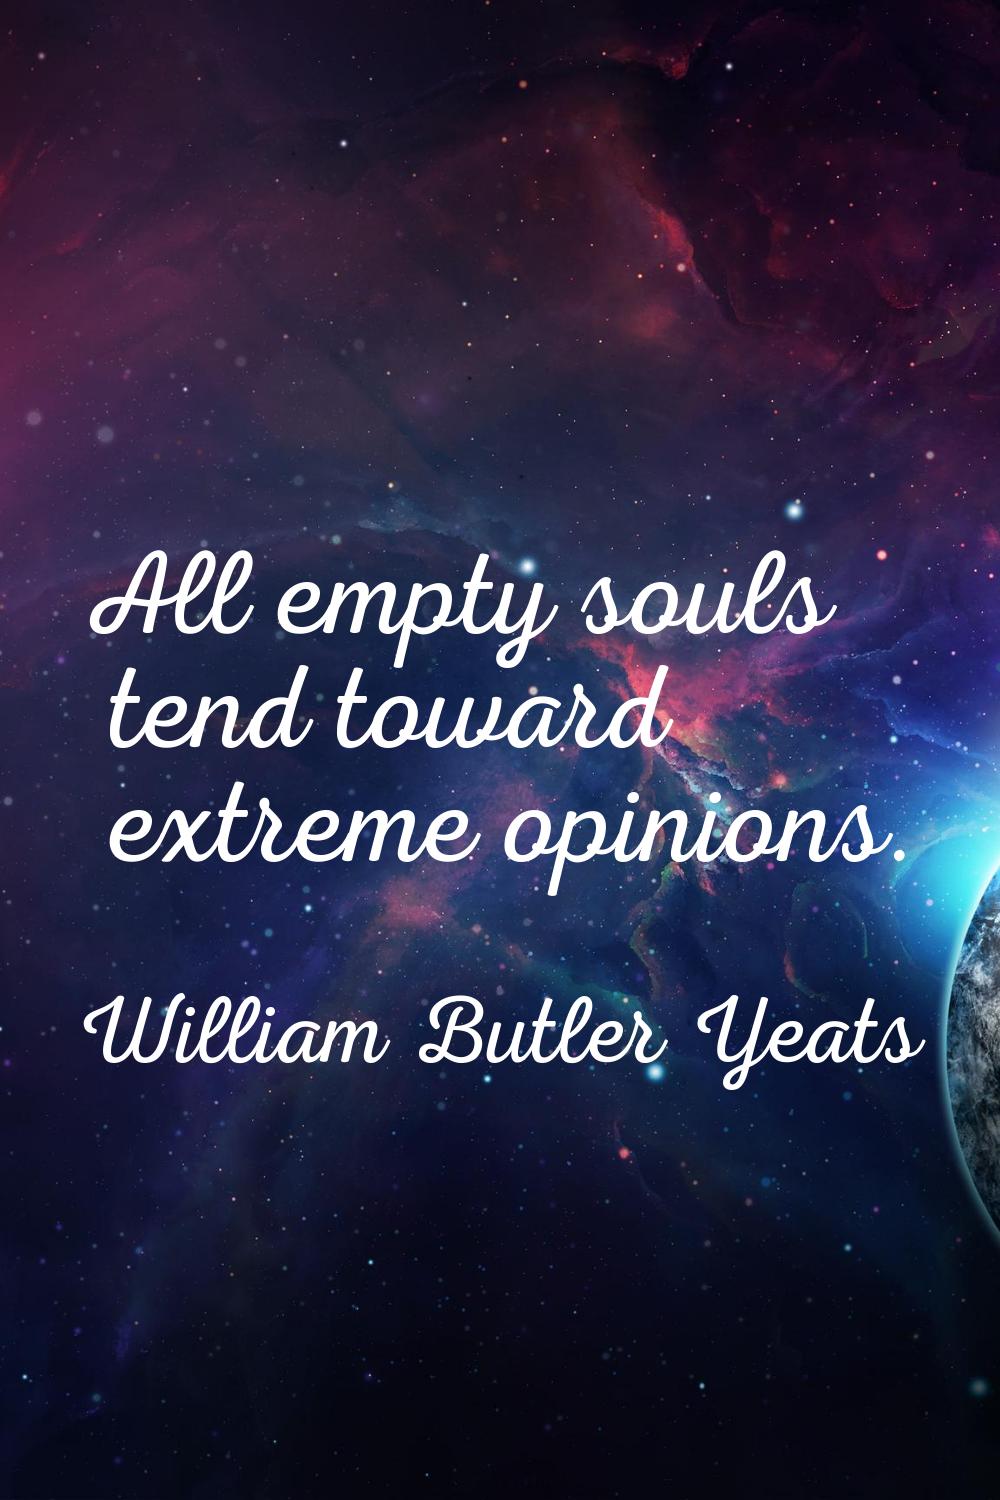 All empty souls tend toward extreme opinions.